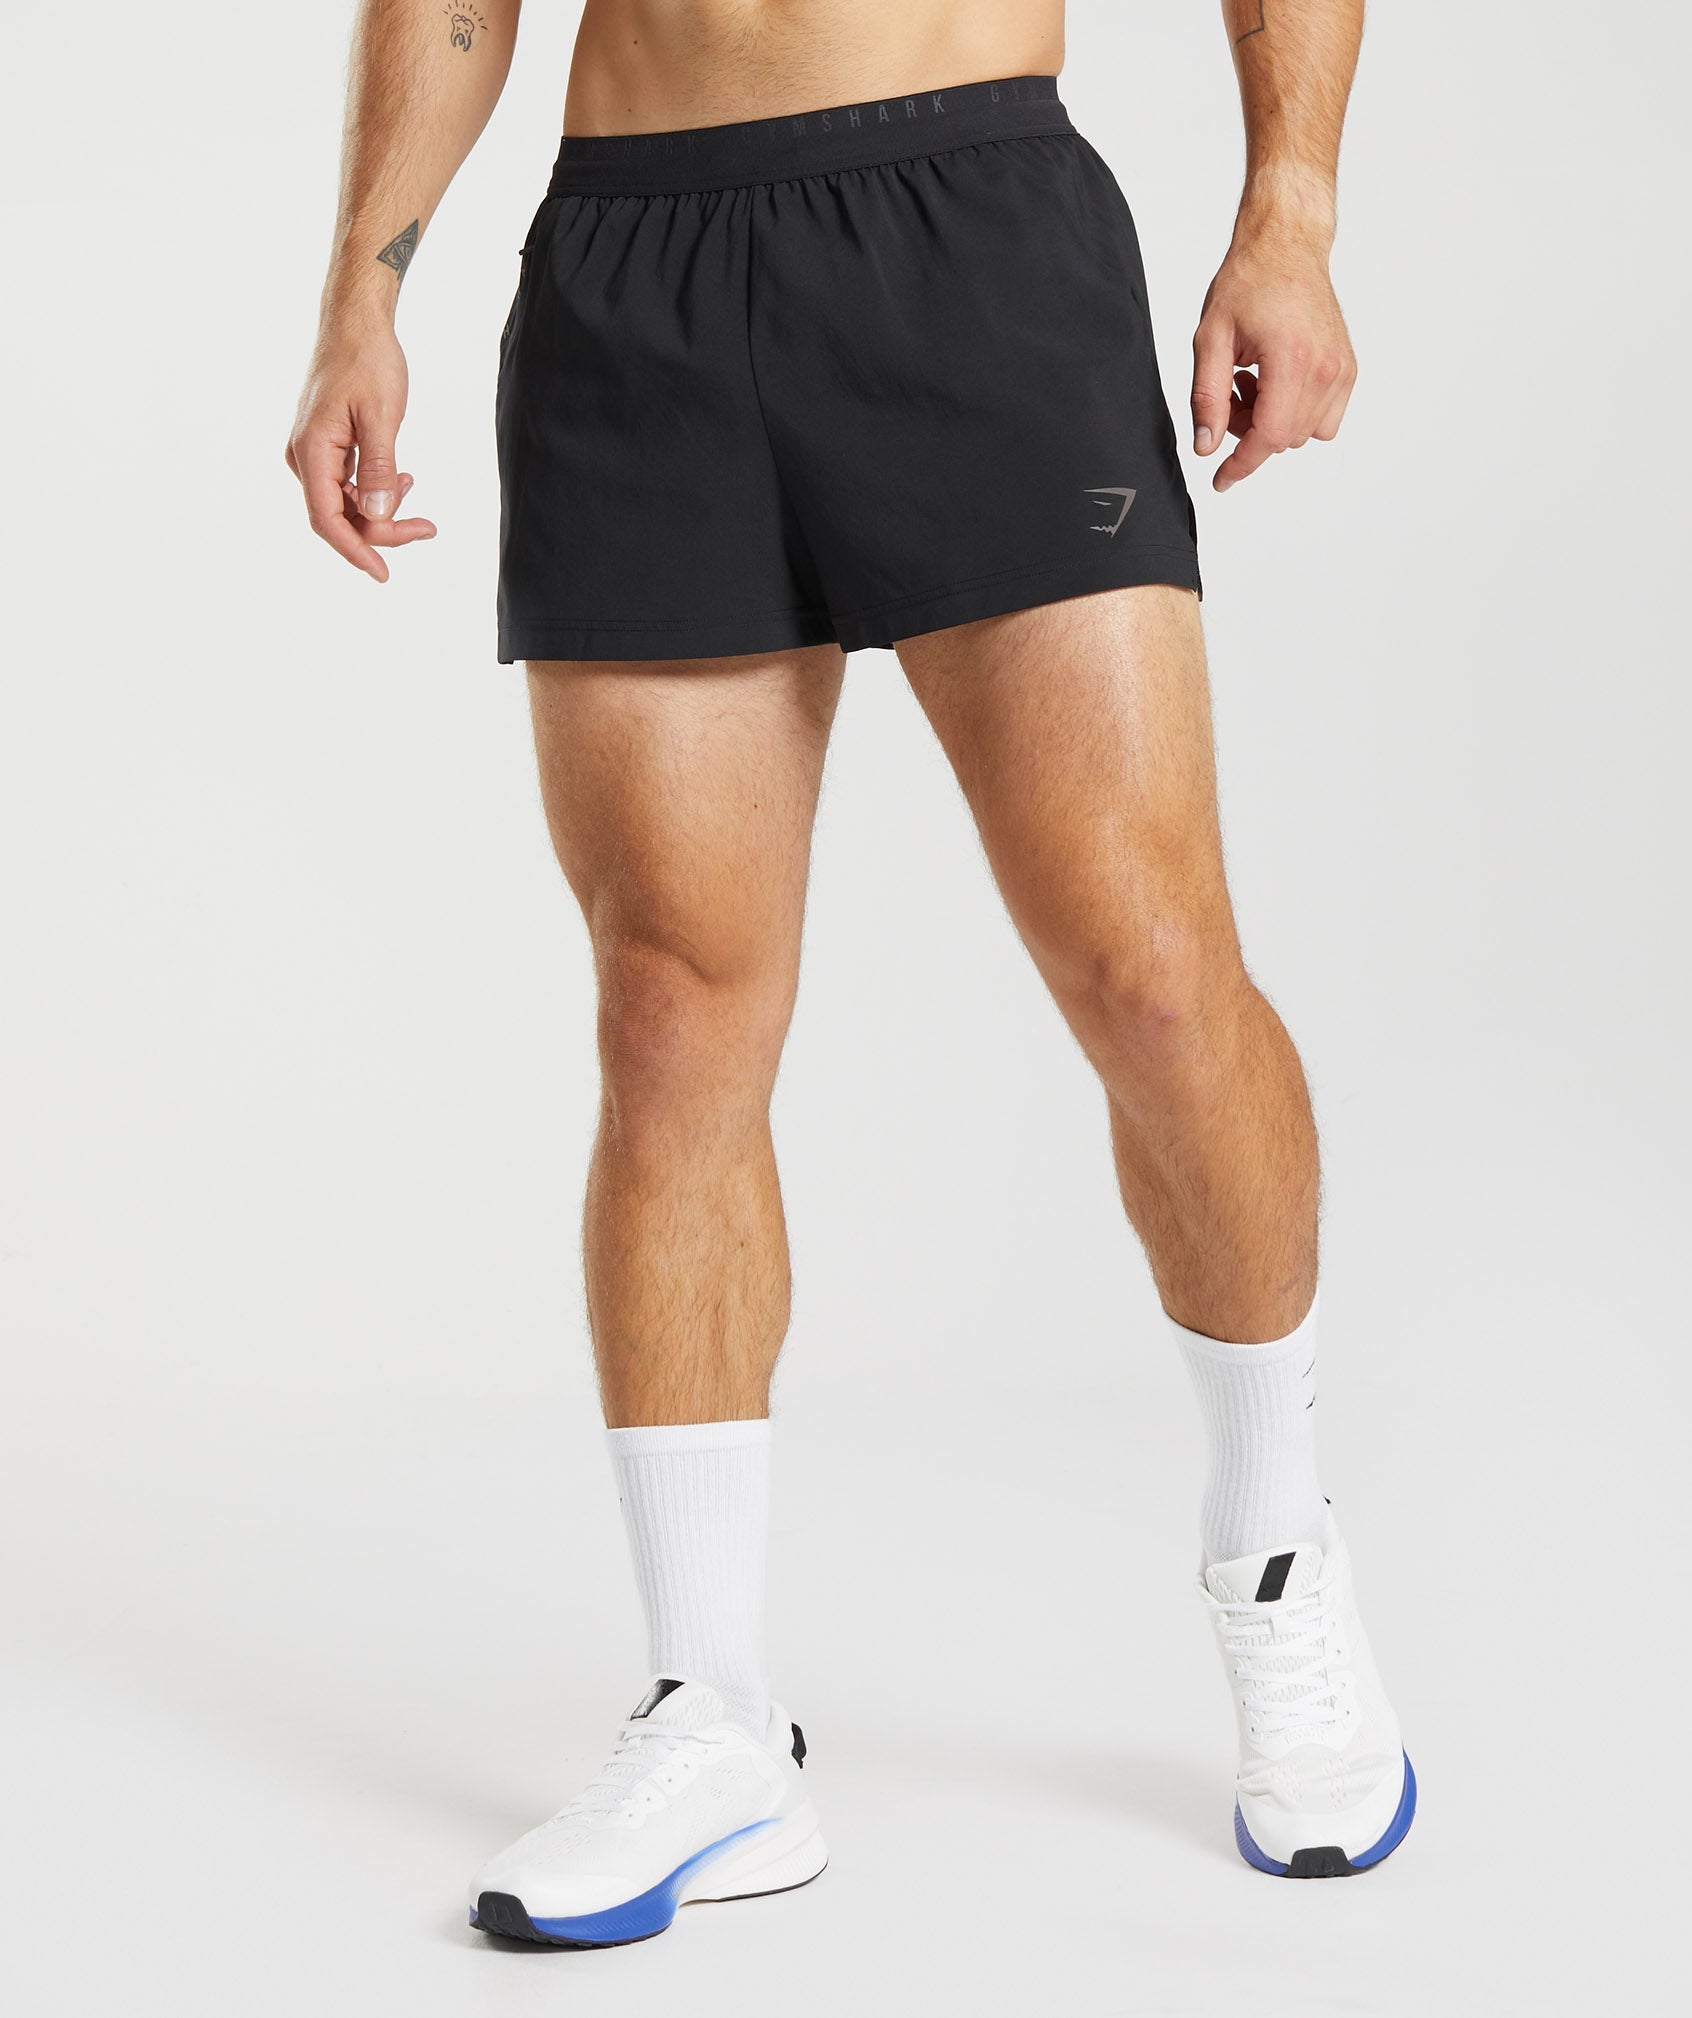  Men's Running Shorts With Liner